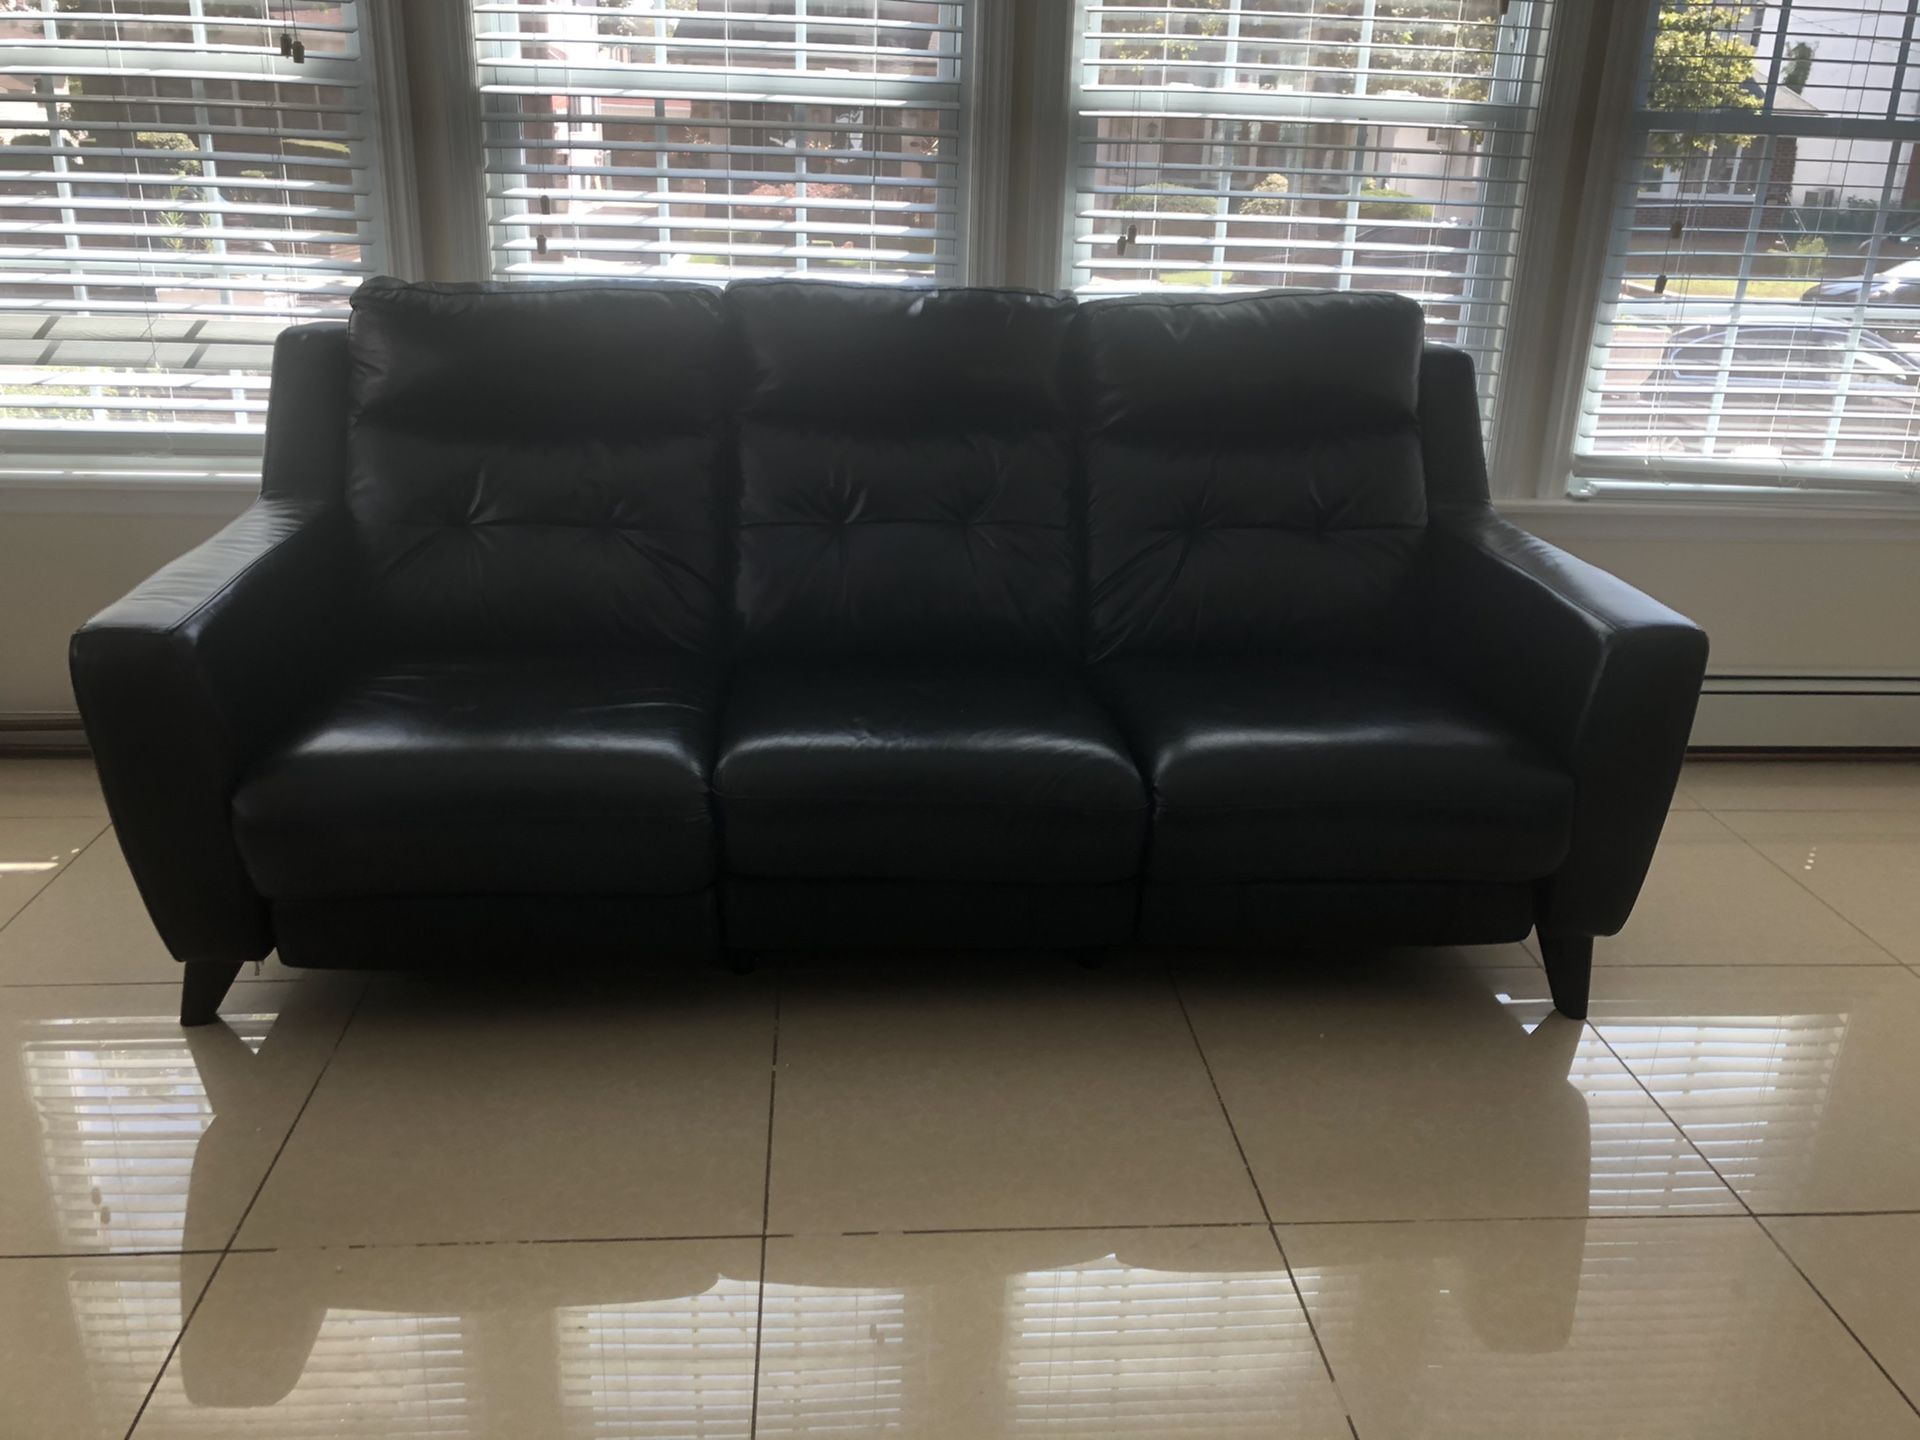 Authentic leather recliner couch